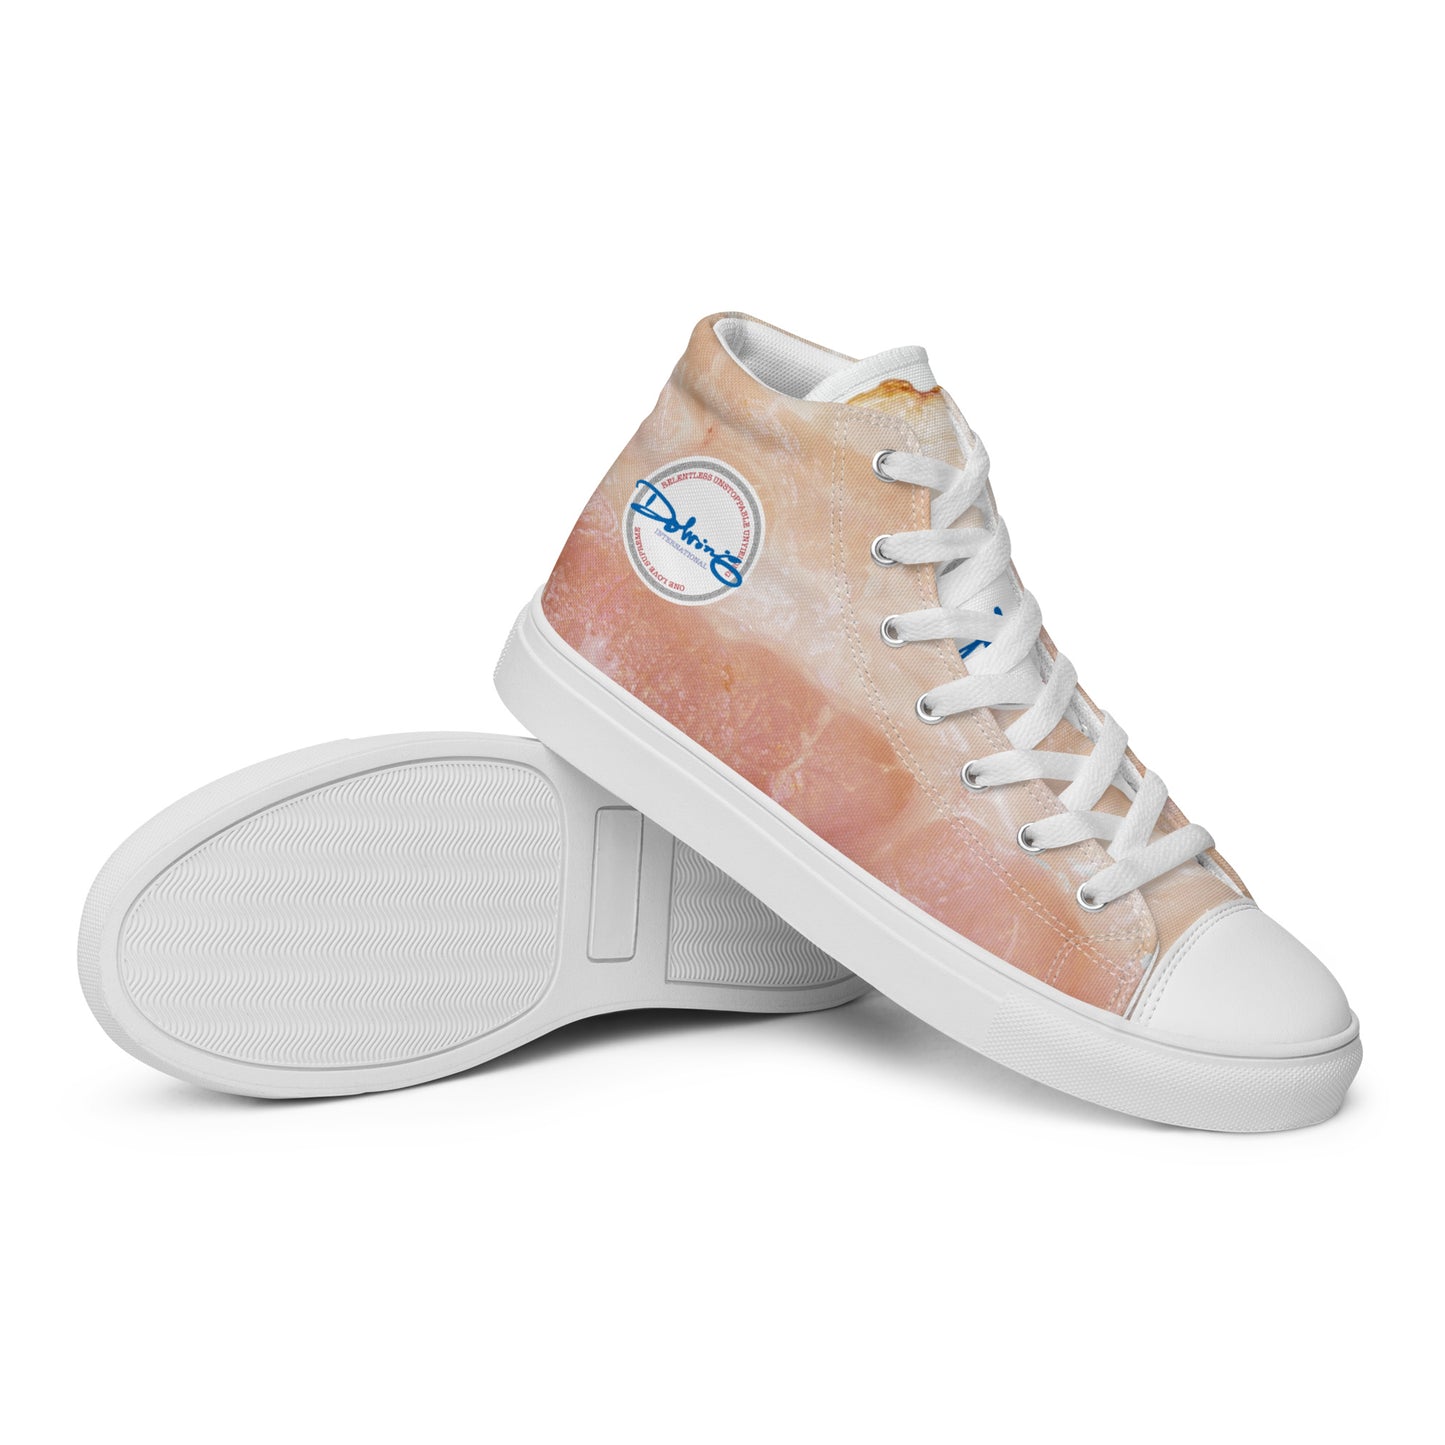 IGNITAS by DOLVING - Men’s high top canvas shoes